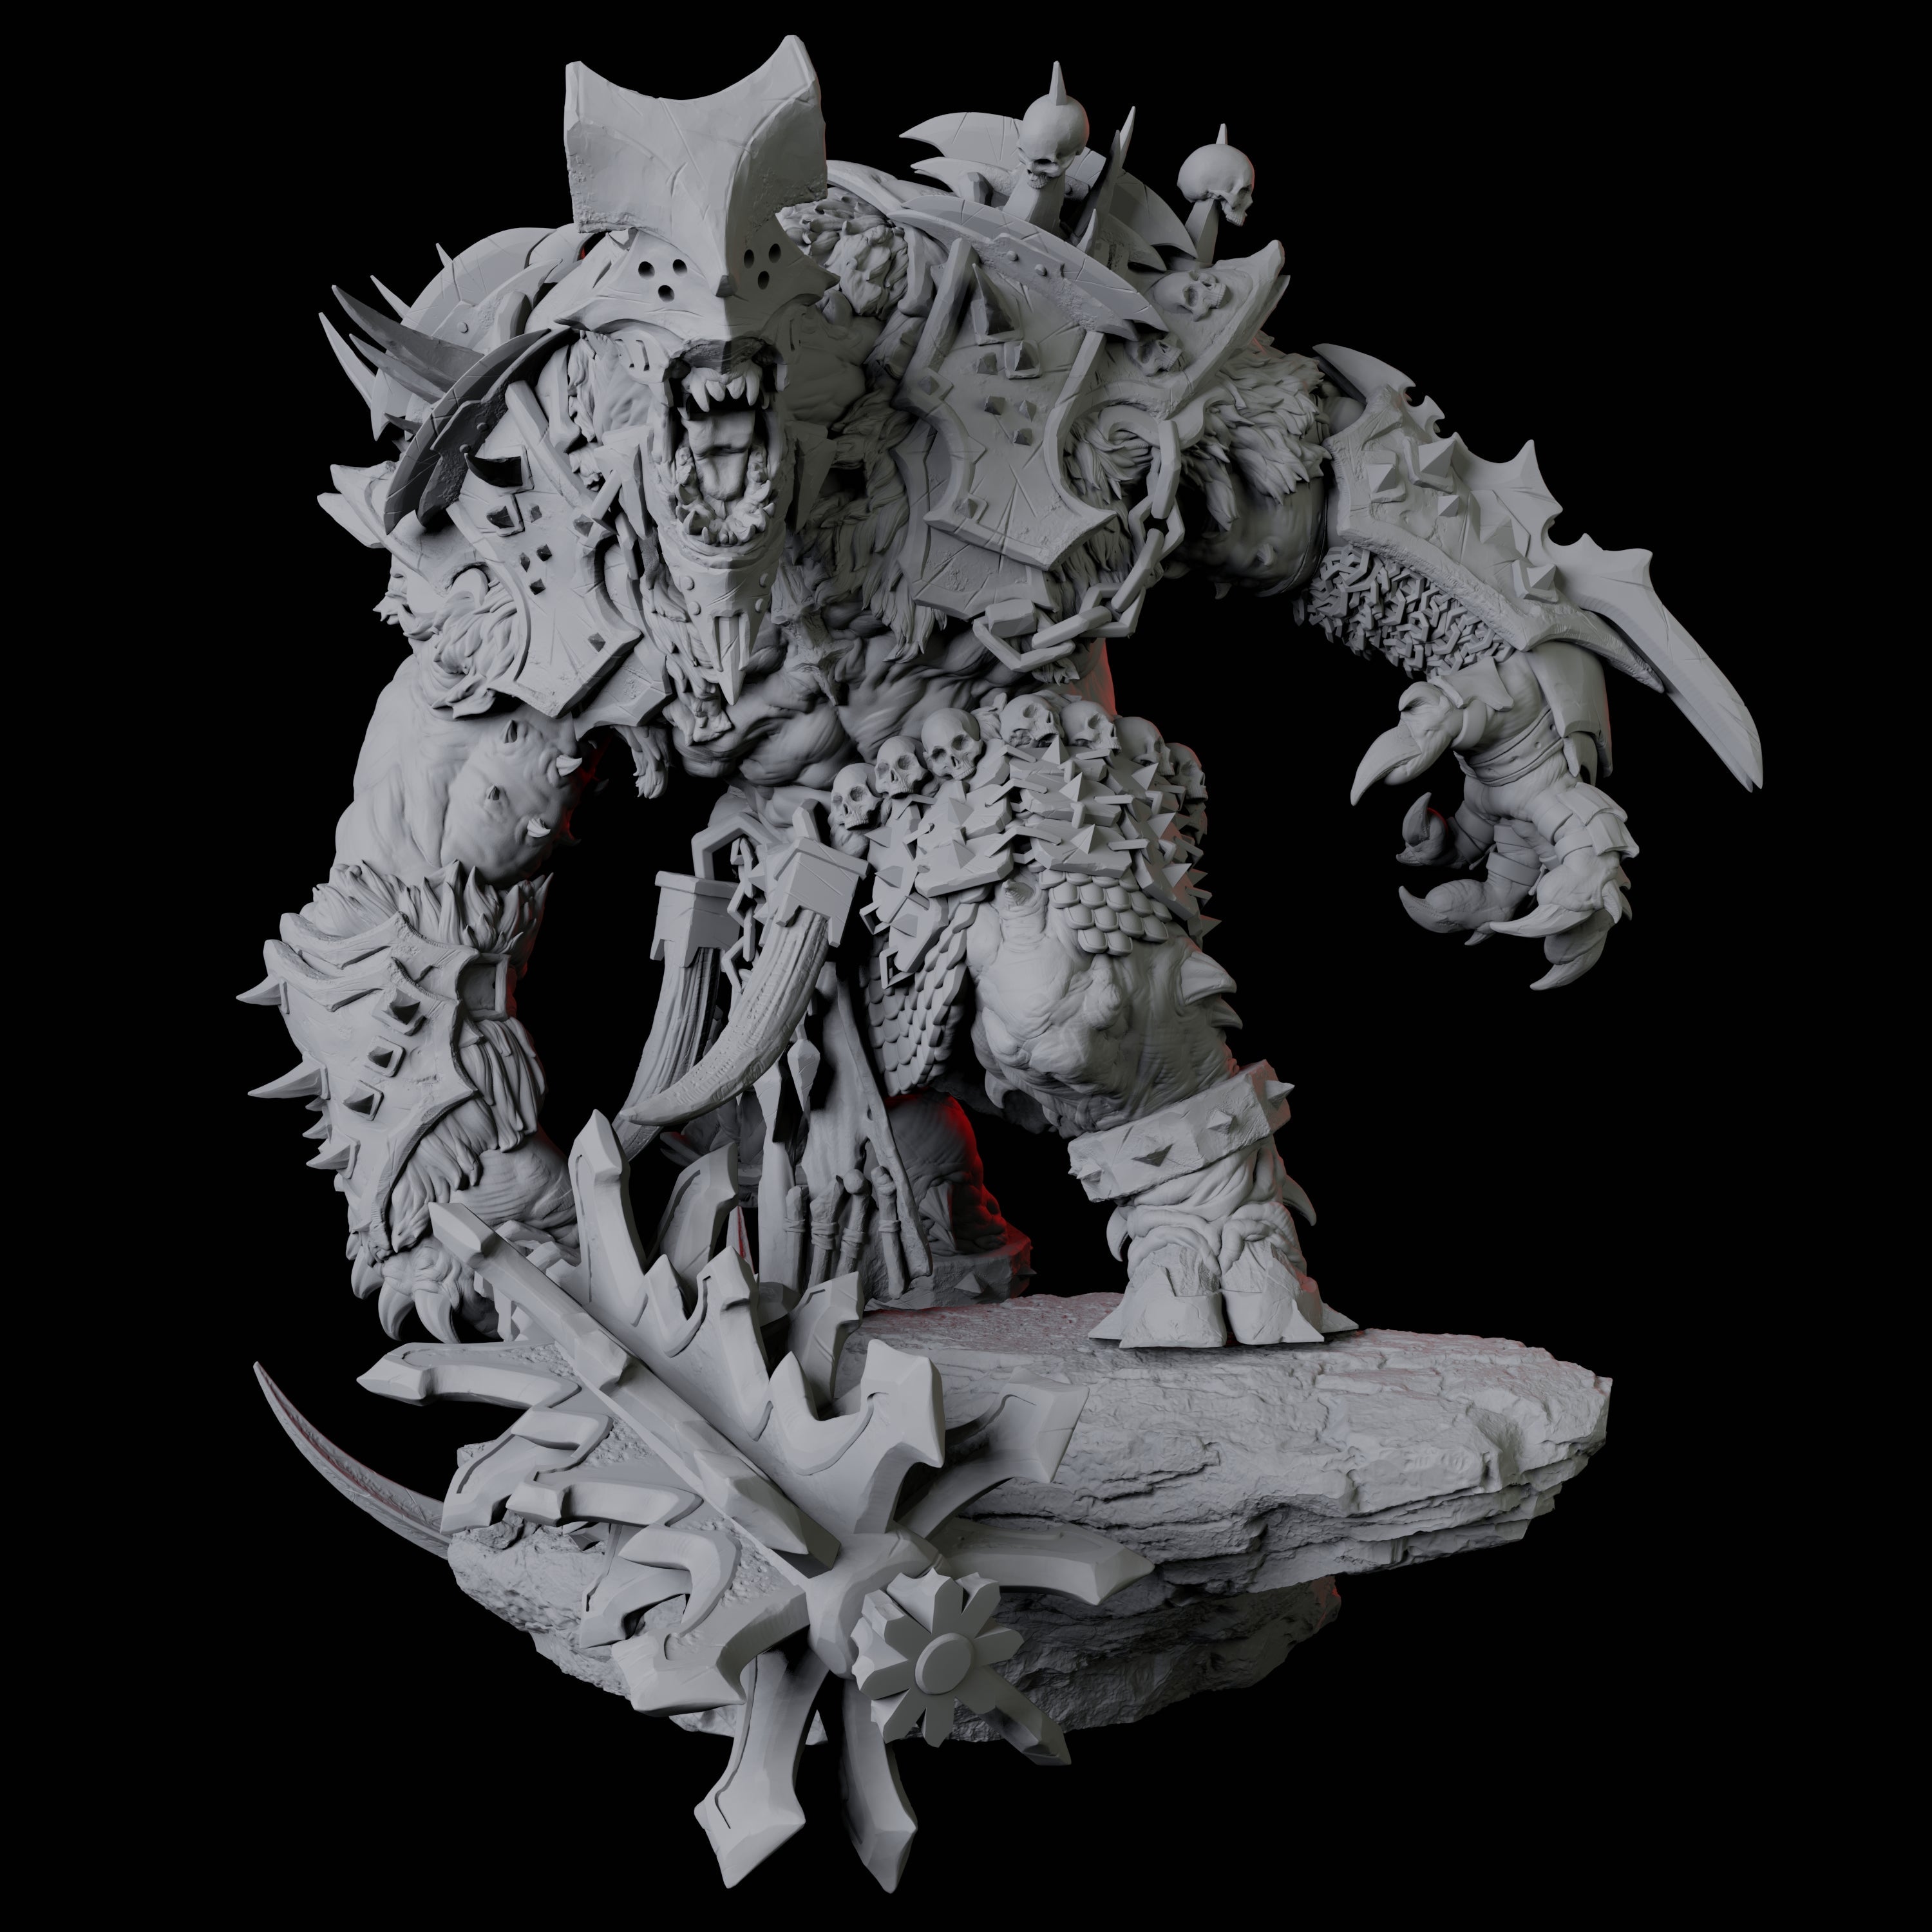 Charging Slaver Demon C Miniature for Dungeons and Dragons, Pathfinder or other TTRPGs